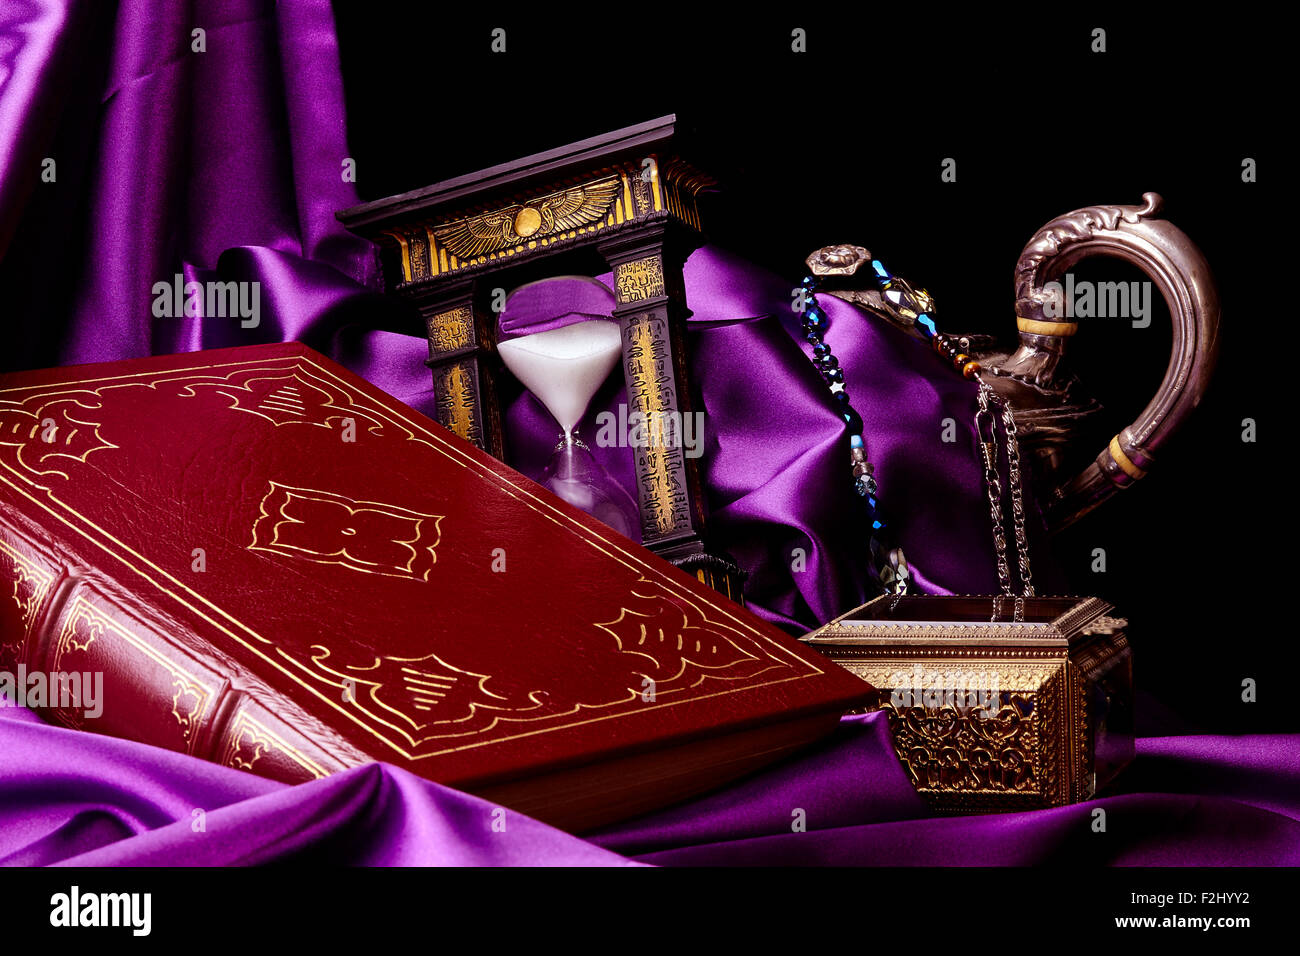 Closed Ancient Book with Treasures on Satin Stock Photo